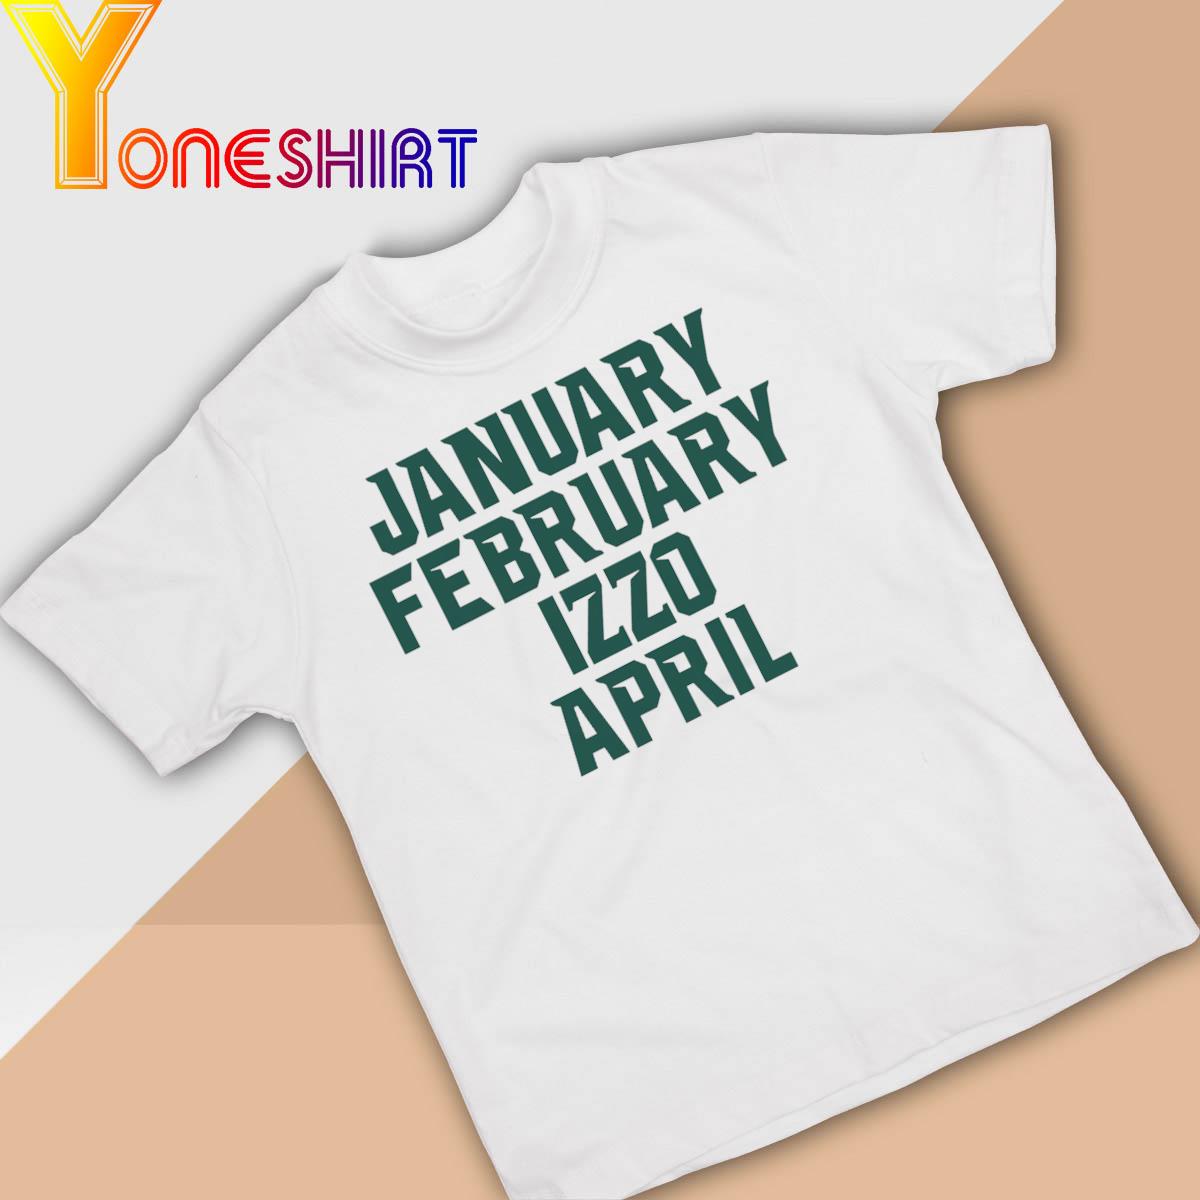 Official January February Izzo April shirt